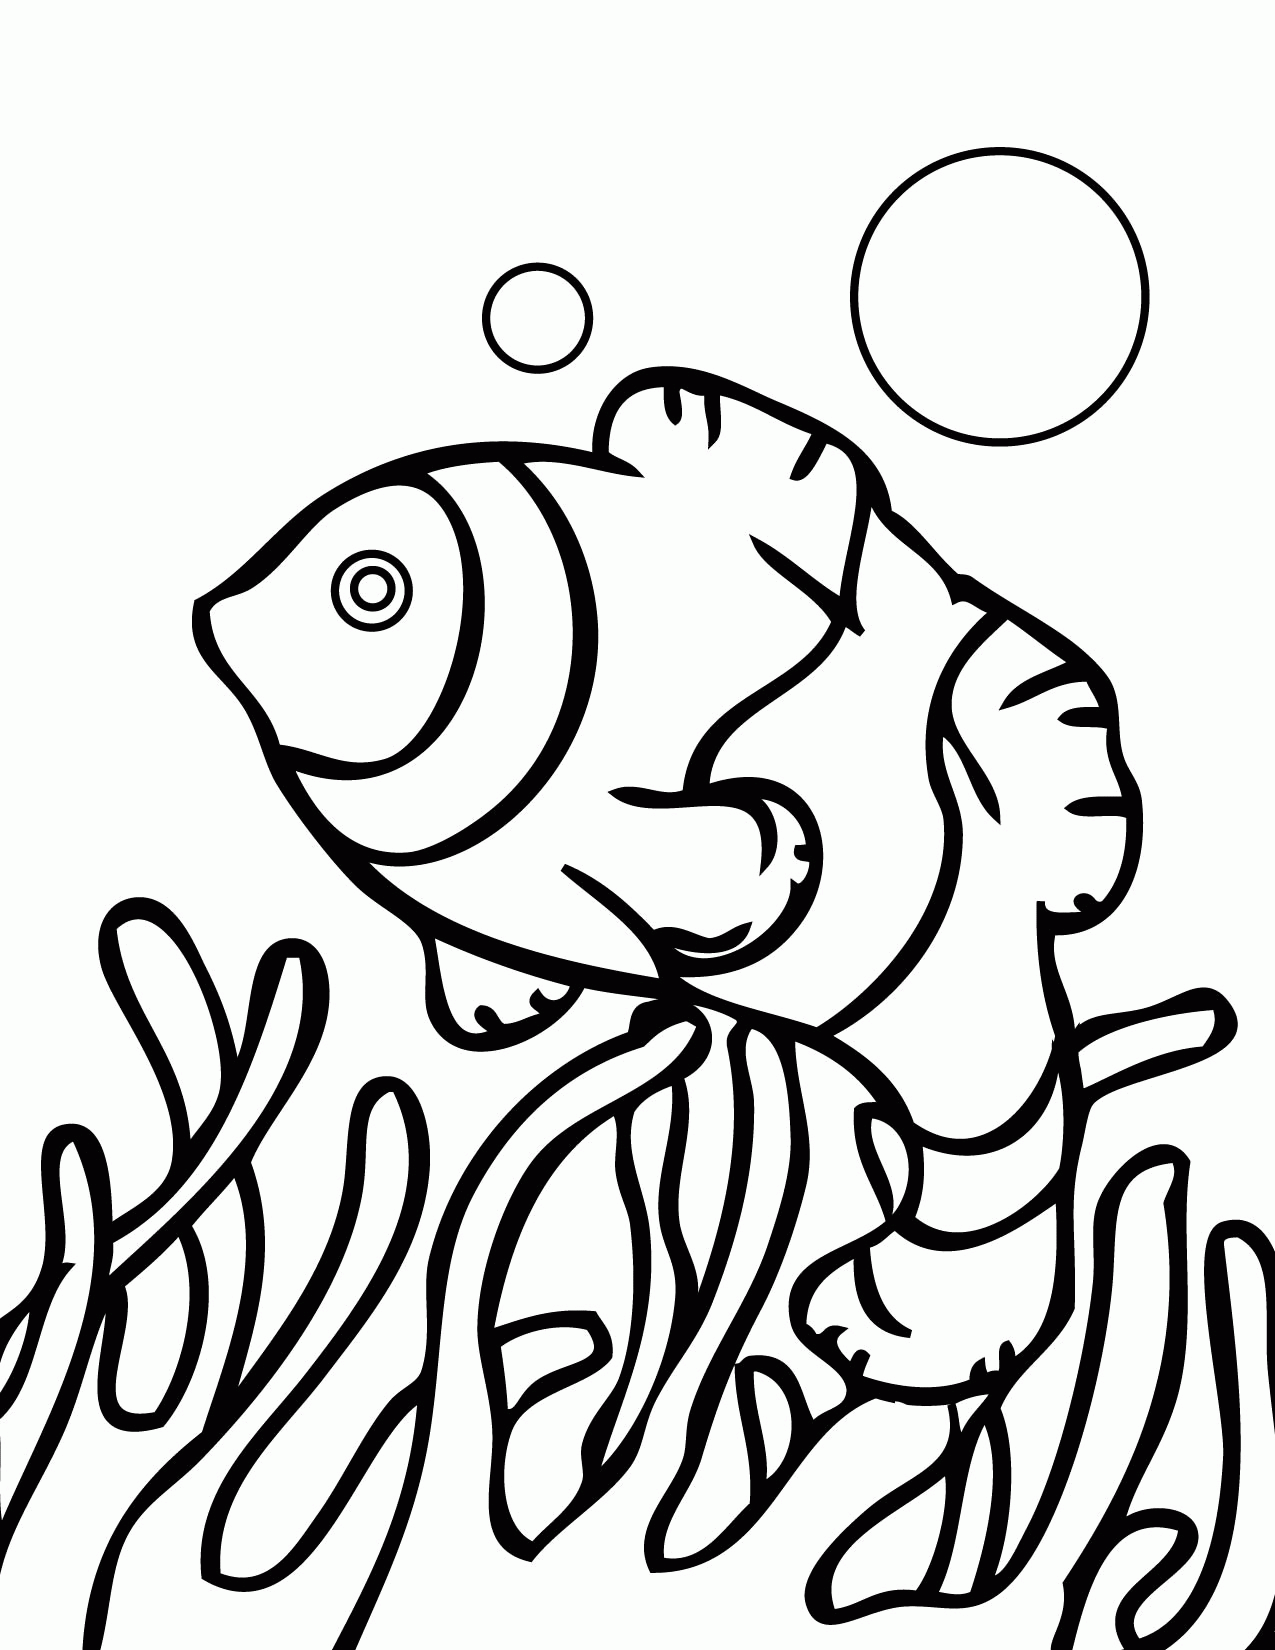 Anemonefish Coloring Page - Handipoints